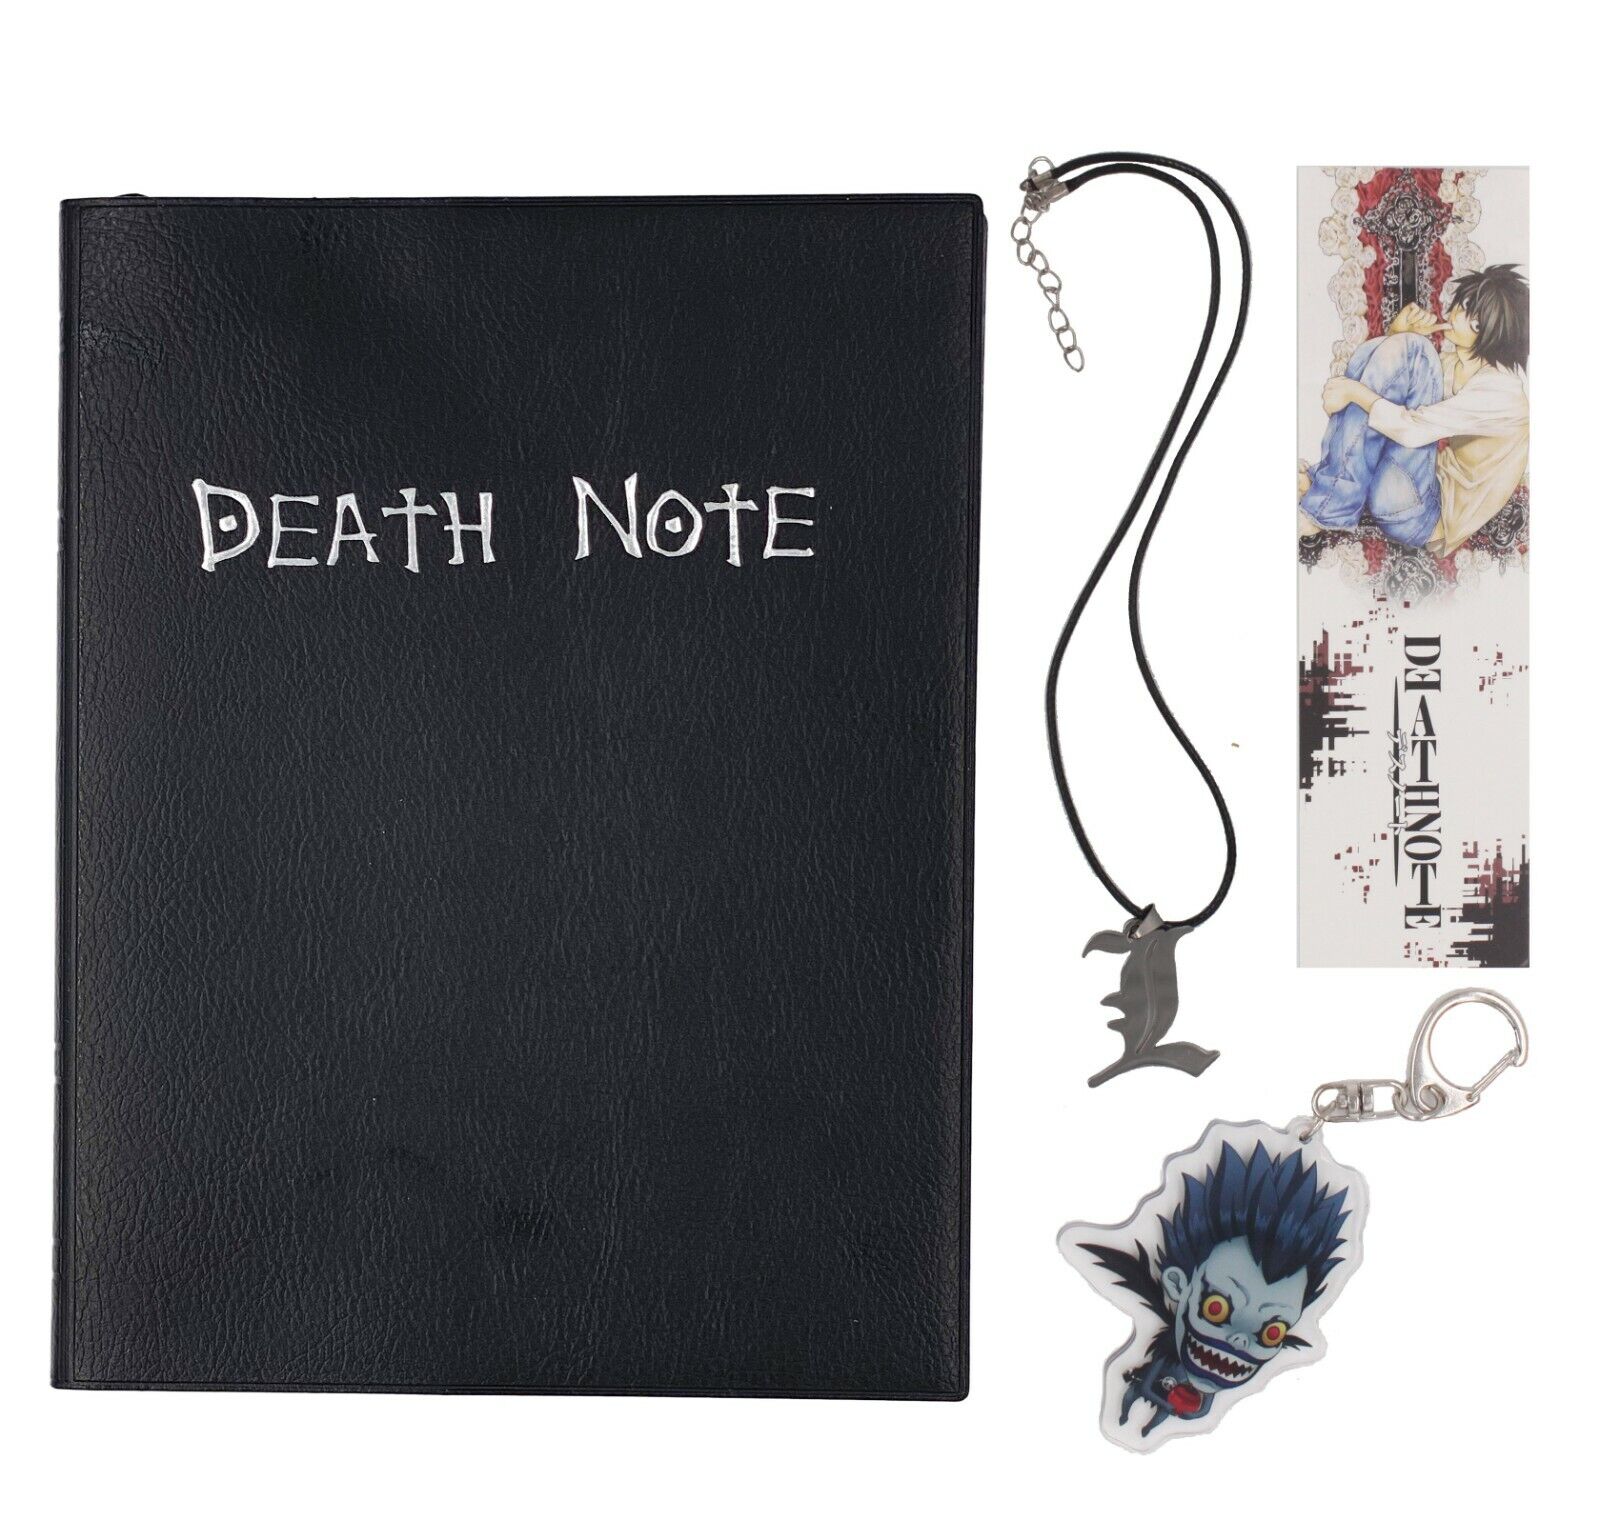 Anime Death Note Cosplay Notebook with Feather Pen, Necklace and Keychain